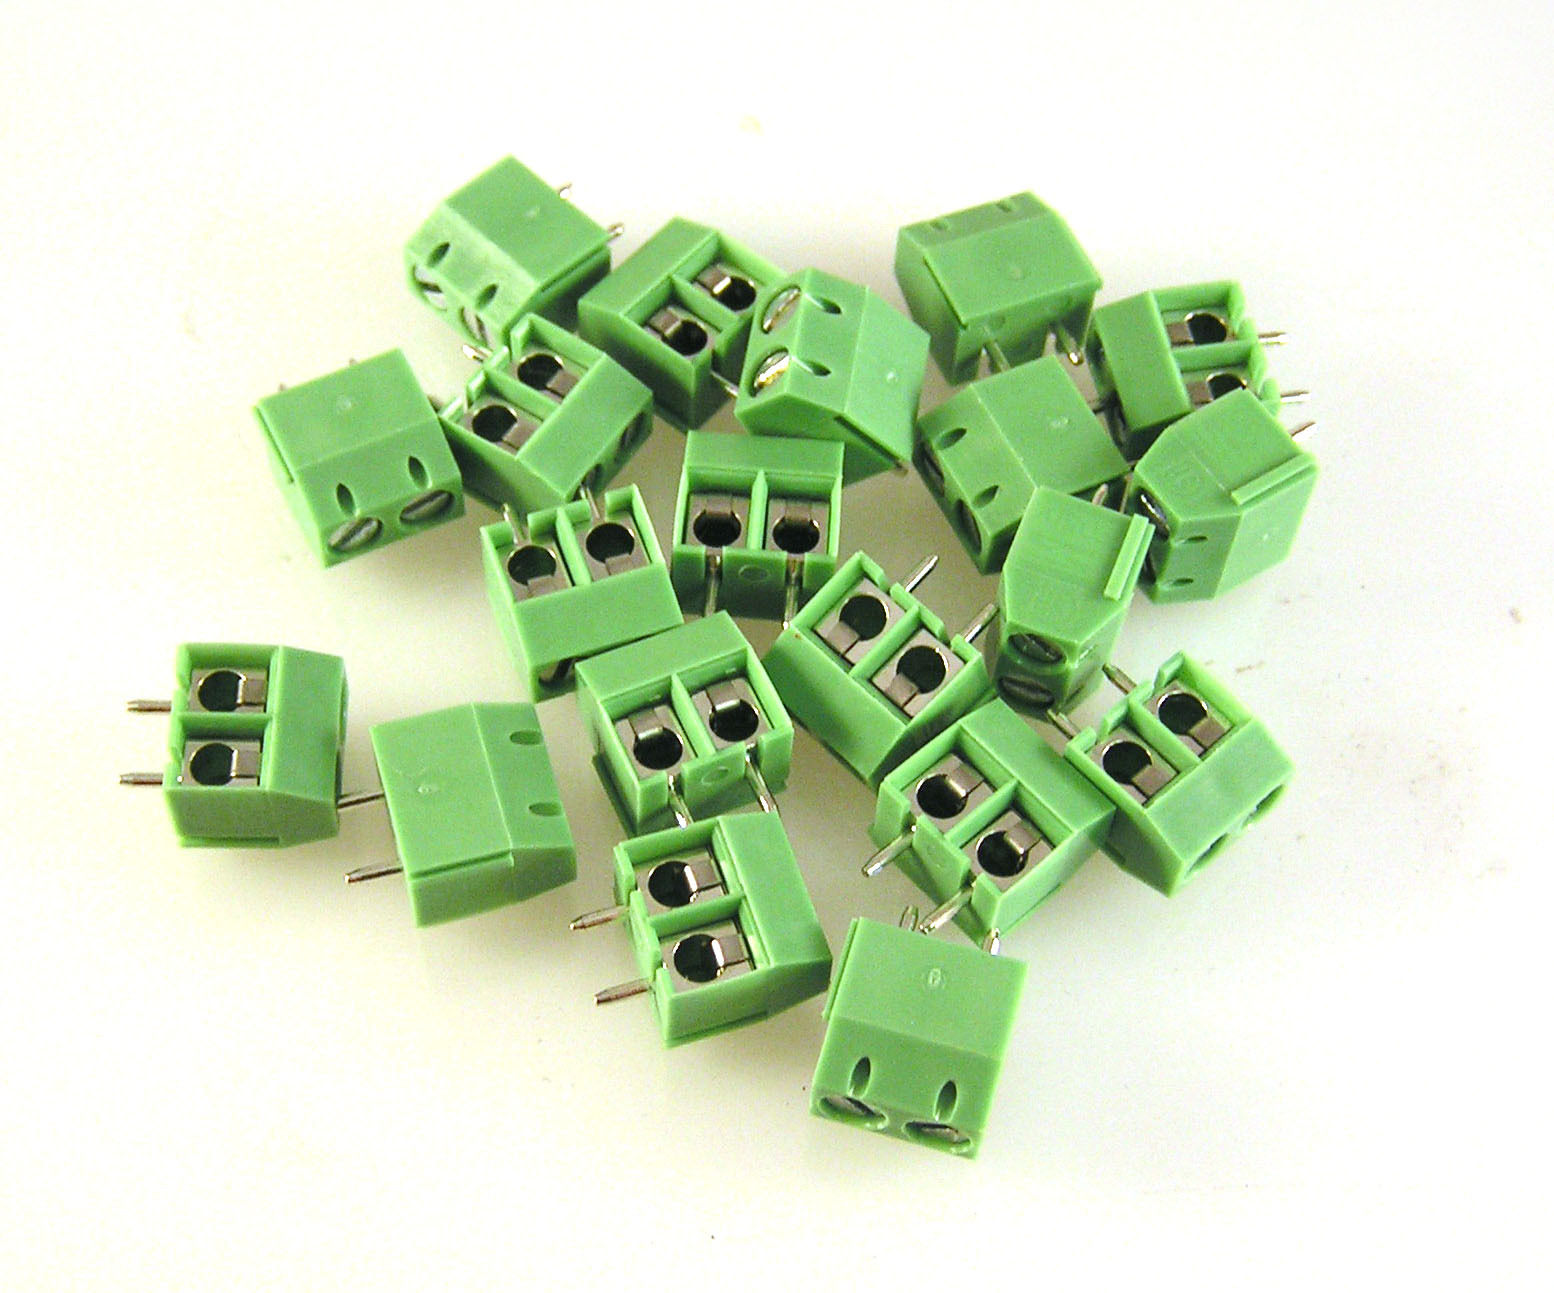 IMO 20.501M/2-SH Terminal Block PCB 2 Way Clip Fit 5mm Pitch 20 Pieces OM0958